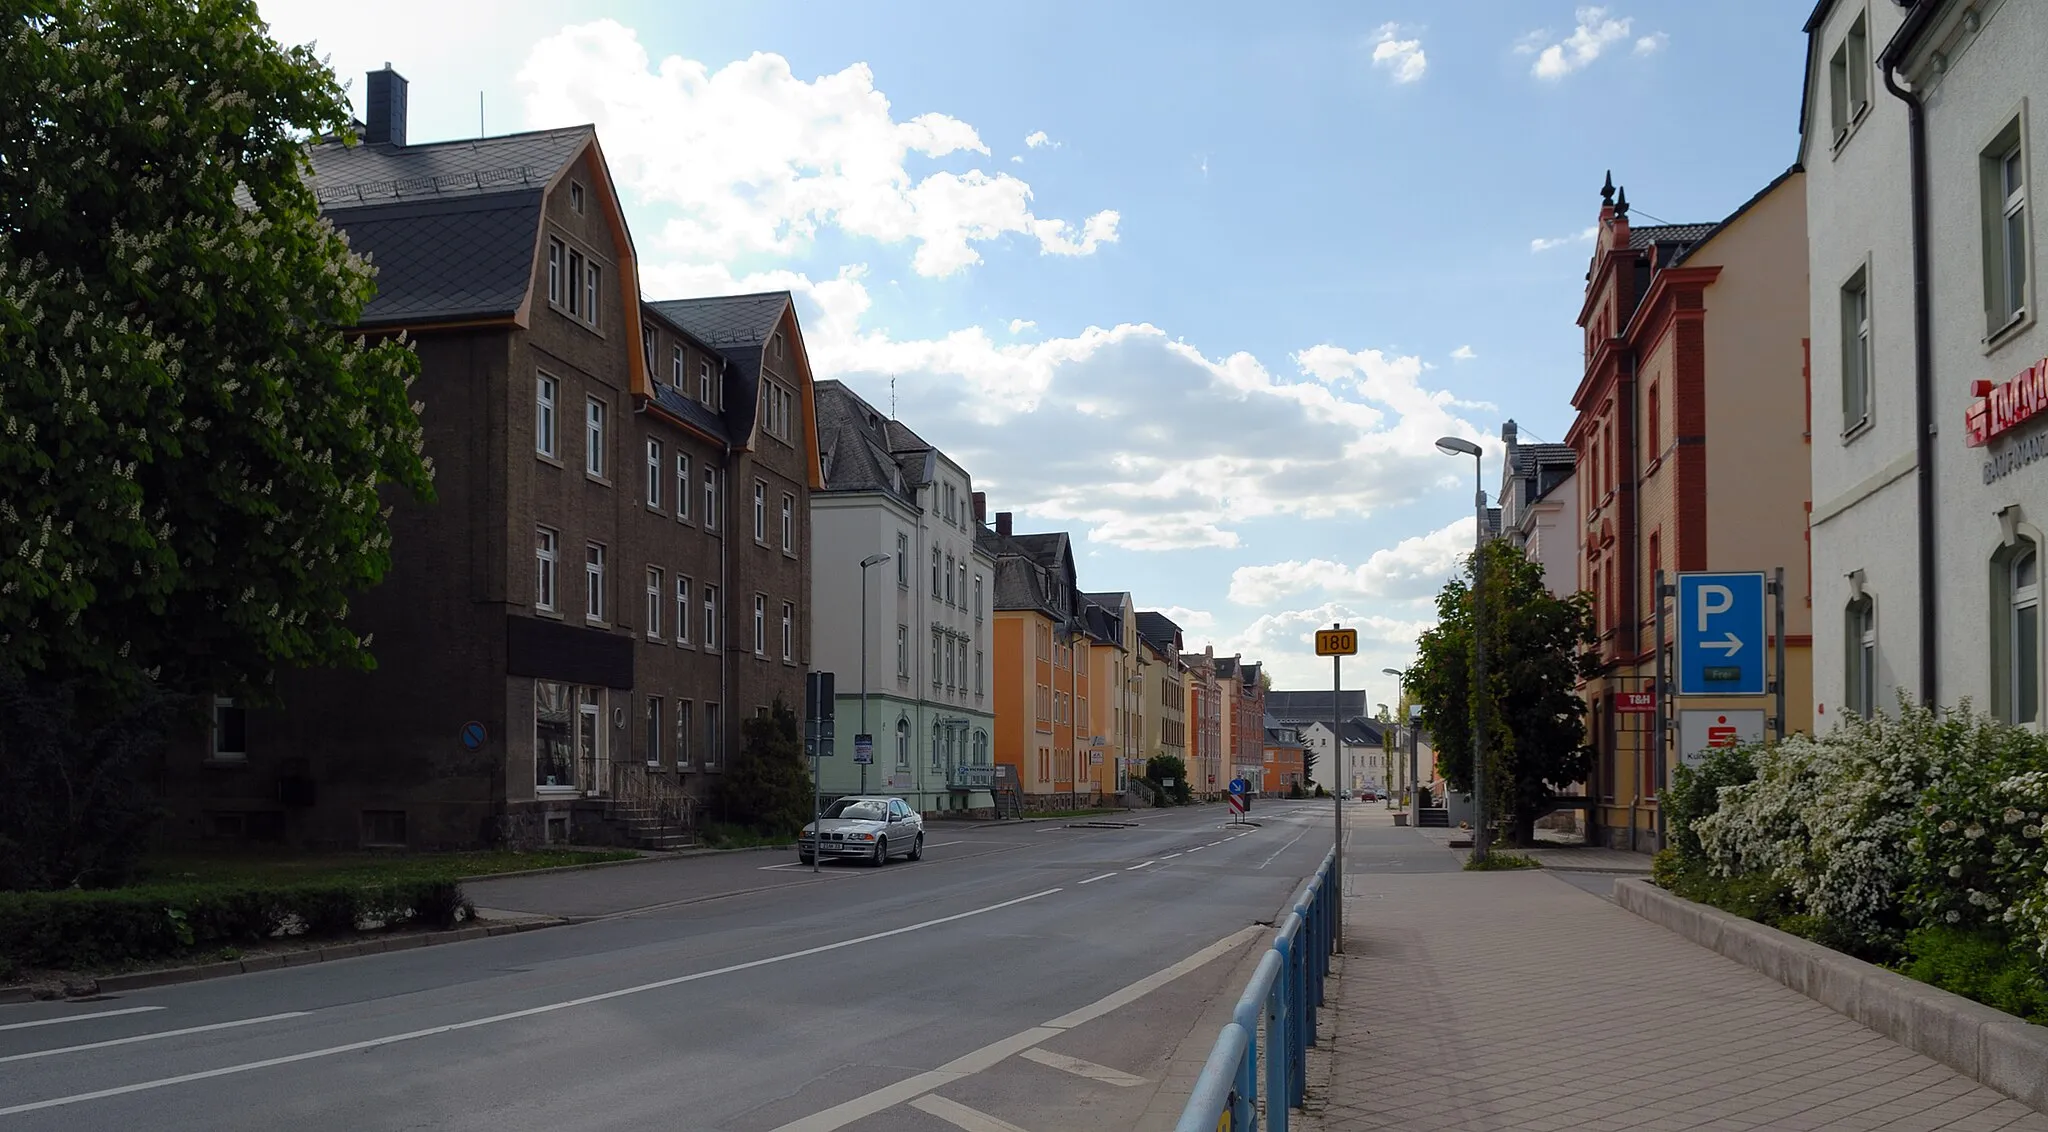 Photo showing: This image shows the Augustusburg street in Flöha, Germany, which is part of the interstate road 180 and the main street of the town.